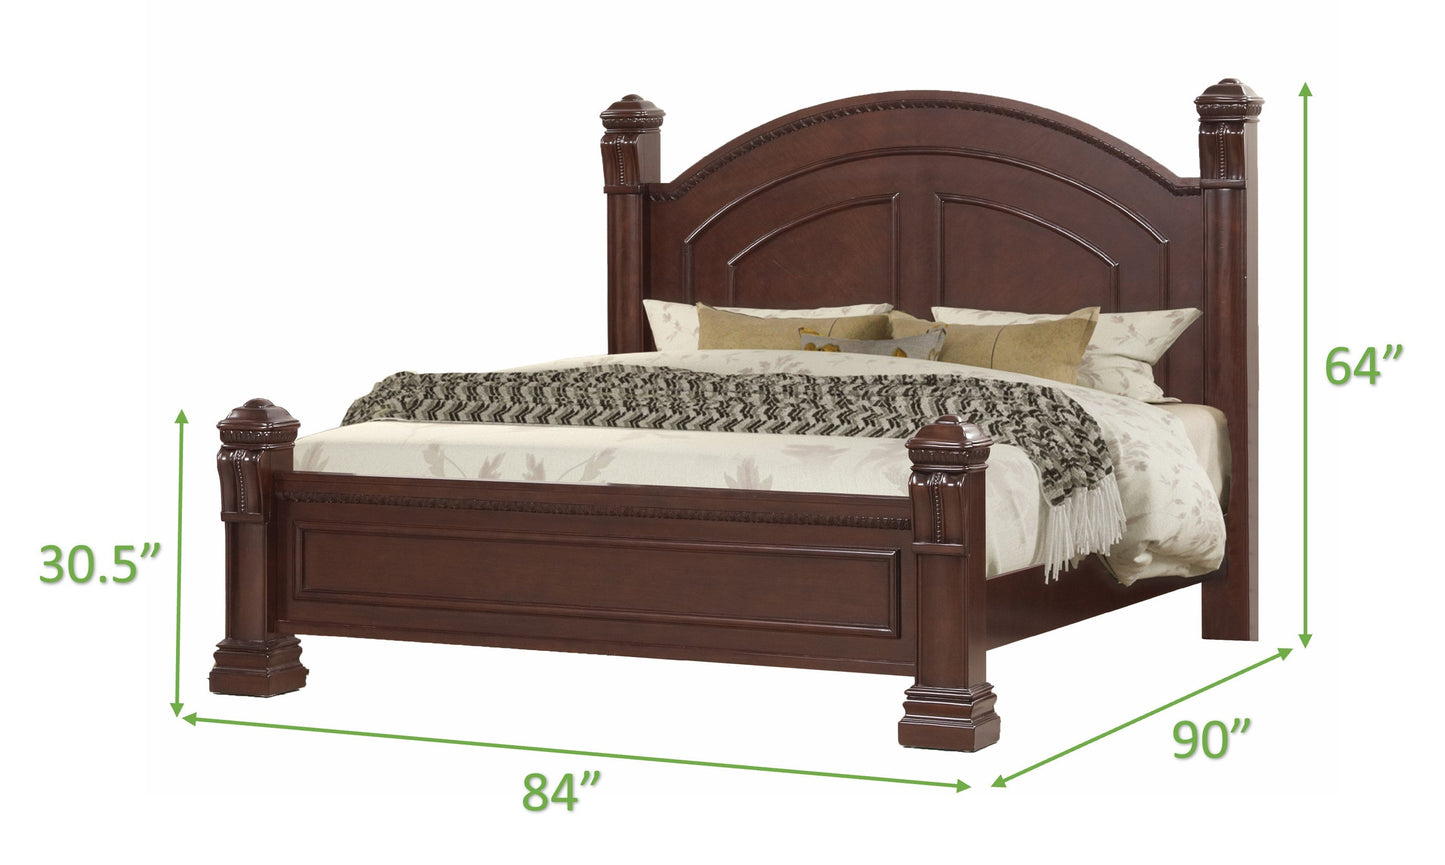 Aspen King Size Traditional Bed made with Wood